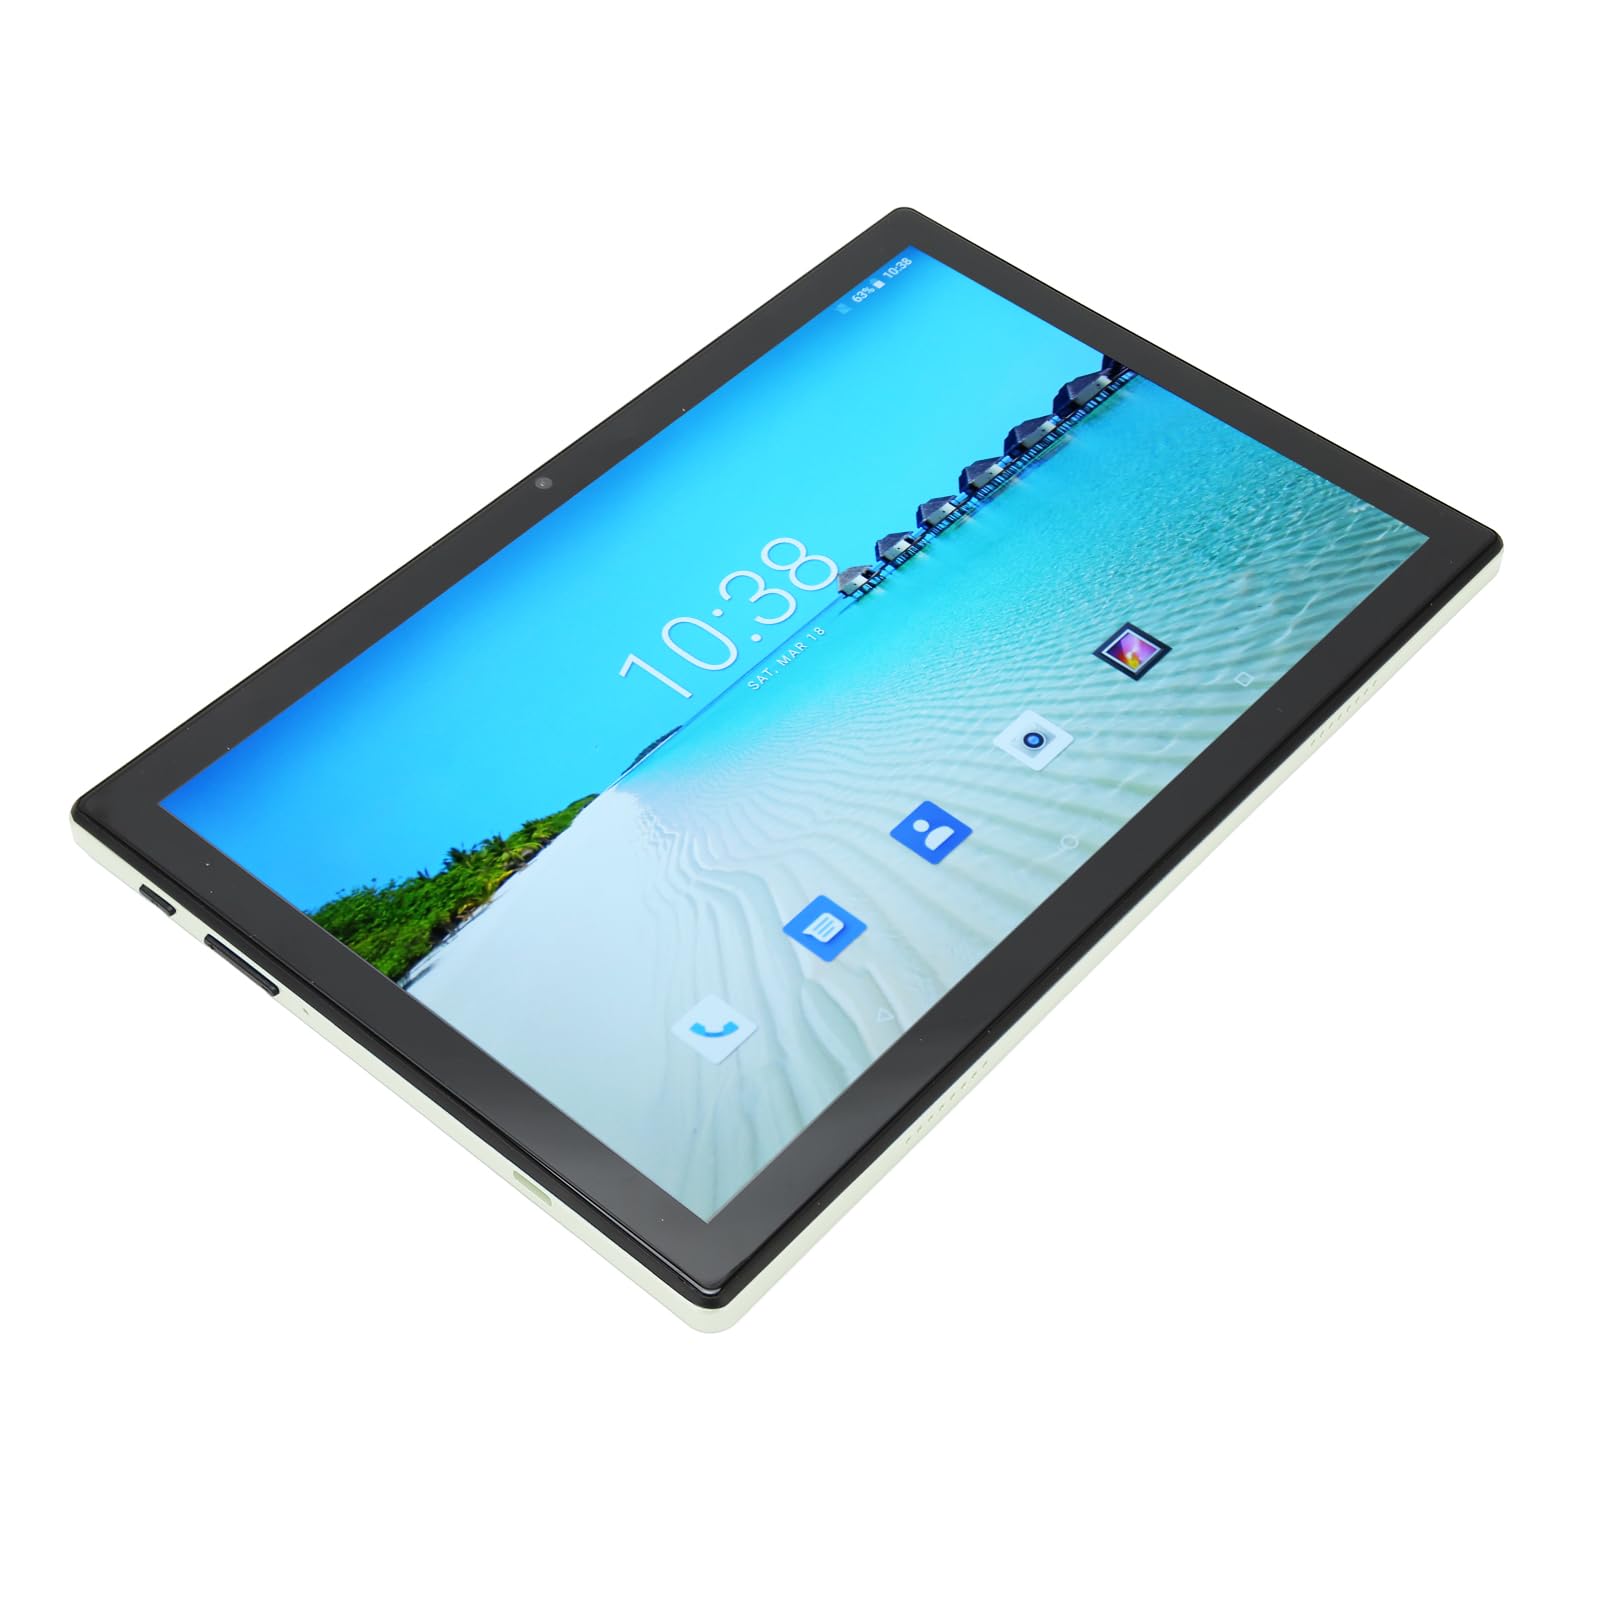 Pomya 10.1 Inch 5G WiFi Tablet for Android8.1, 1280x800 HD IPS 4G LTE Tablet with Dual Camera, 2GB RAM 32GB ROM, Octa Core CPU 4000mAh Type C Gaming Tablet for Office, Daily (Green)